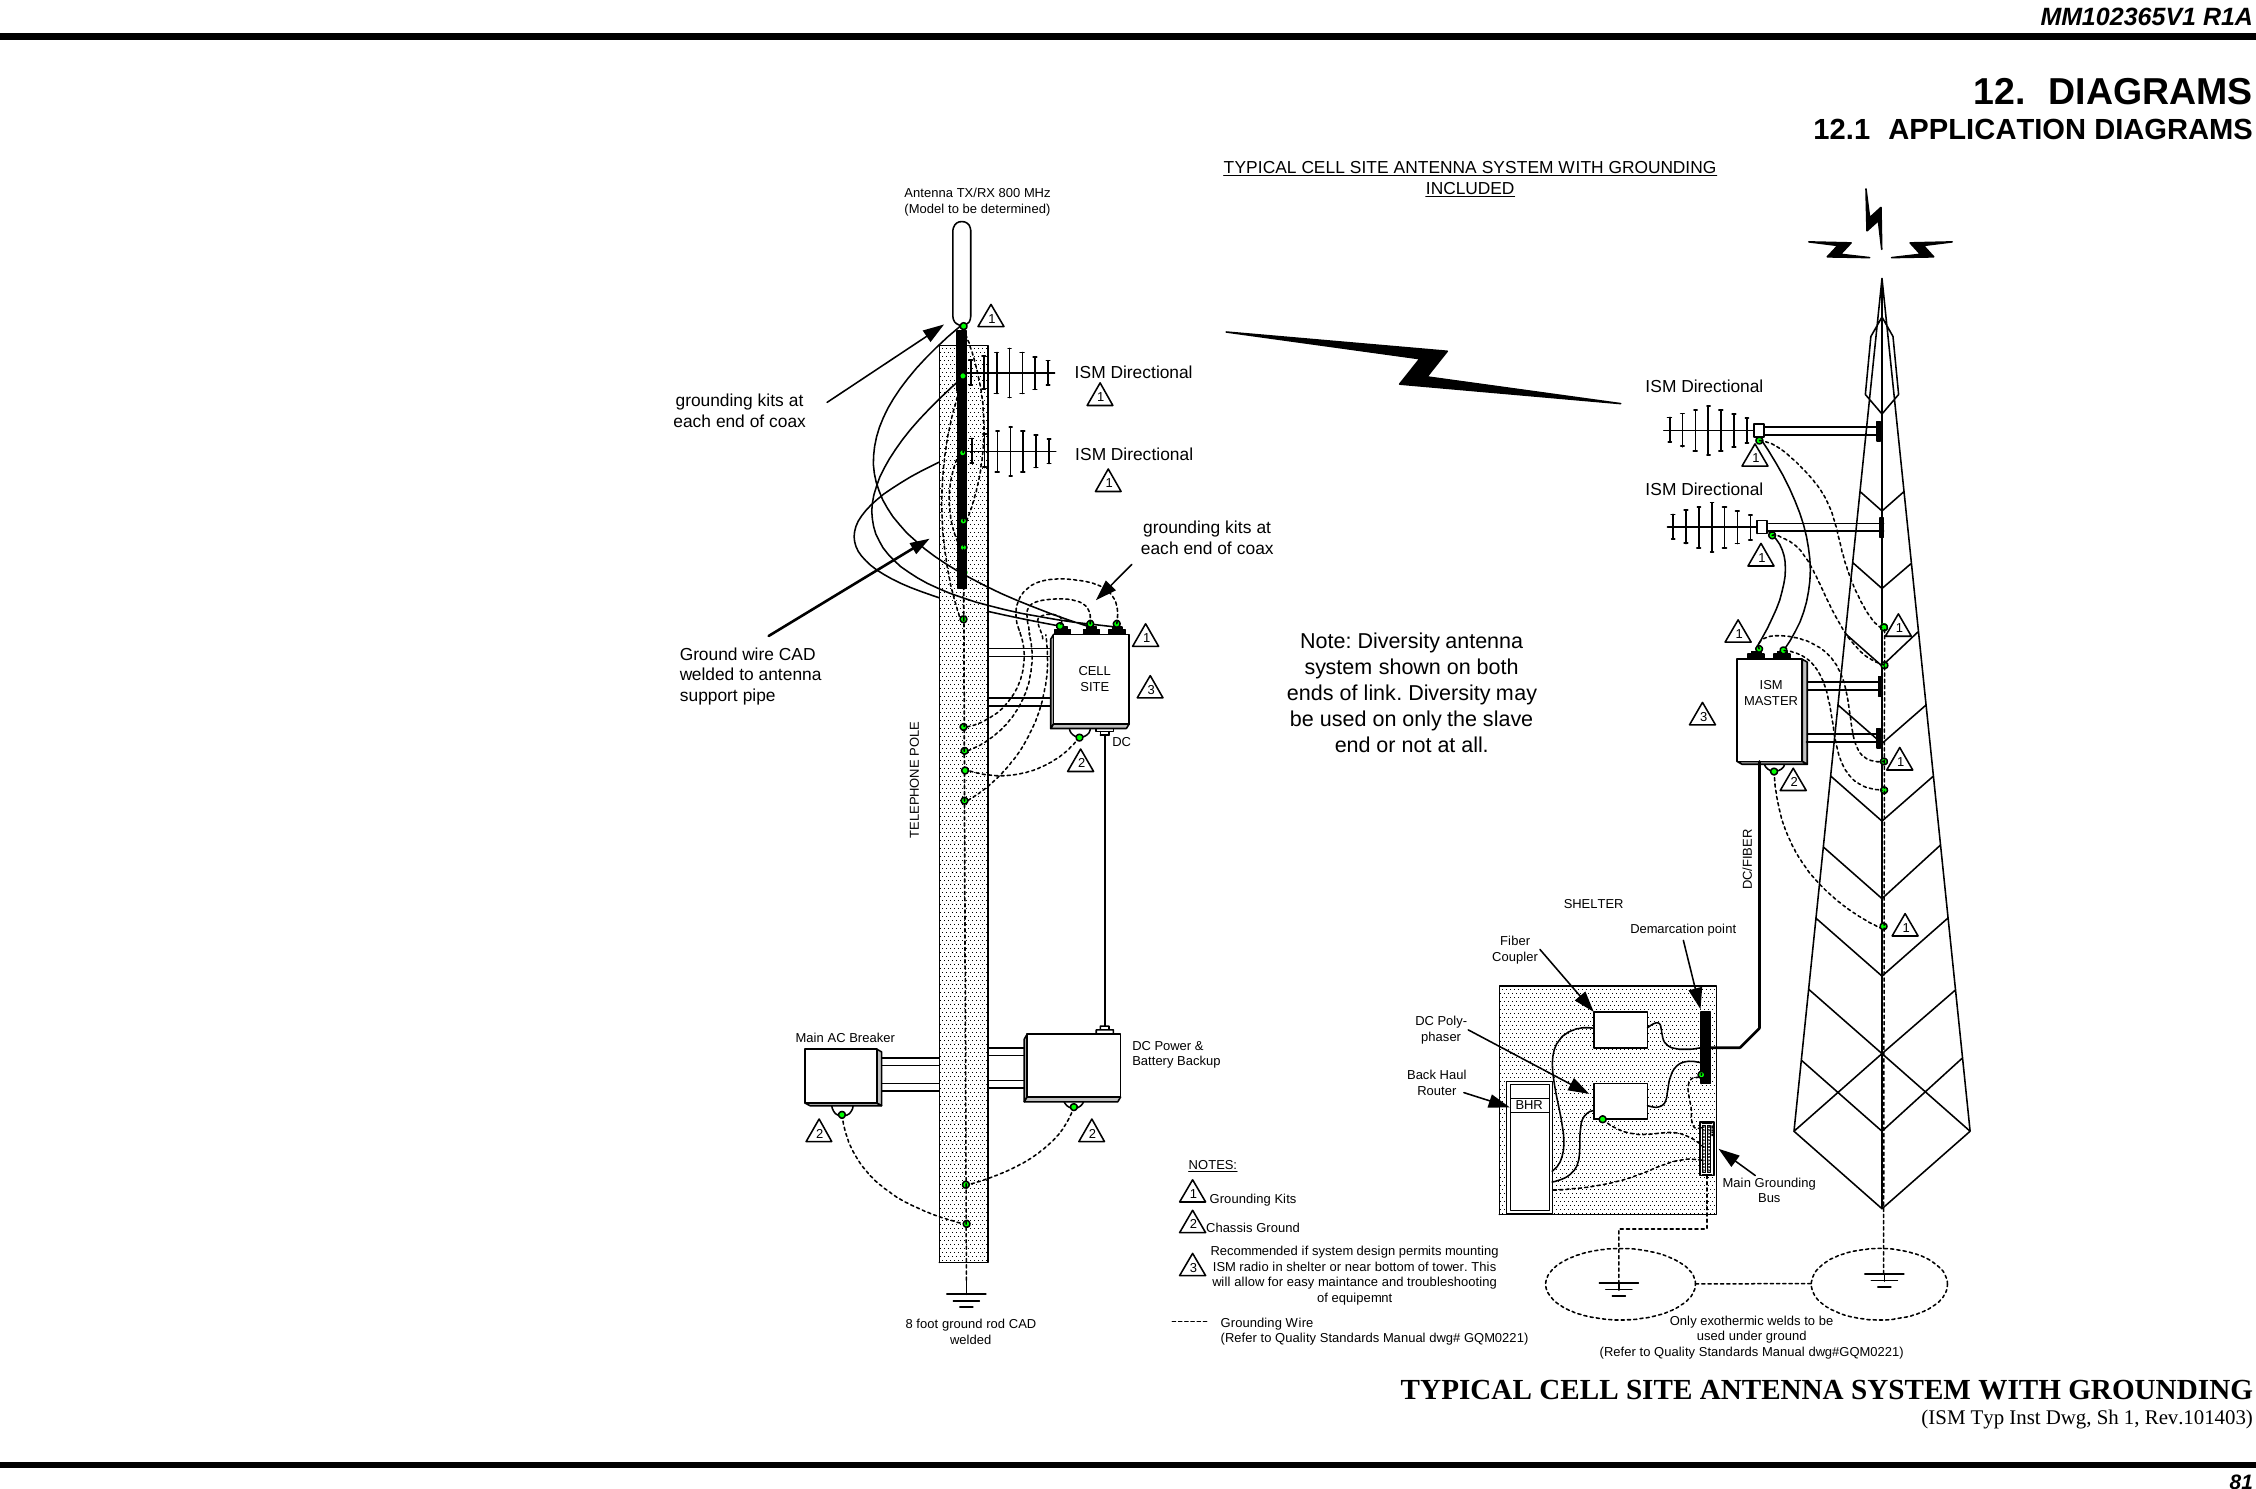 MM102365V1 R1A 12. DIAGRAMS 12.1 APPLICATION DIAGRAMS Grounding Wire(Refer to Quality Standards Manual dwg# GQM0221)1Main AC BreakerAntenna TX/RX 800 MHz(Model to be determined)TELEPHONE POLEDC2NOTES:1Grounding KitsSHELTERgrounding kits ateach end of coaxDC Power &amp;Battery BackupISM DirectionalISM DirectionalISMMASTERISM DirectionalISM DirectionalDC/FIBERDemarcation pointBHRBack HaulRouterMain GroundingBusDC Poly-phaserFiberCoupler2Chassis Ground222111113Recommended if system design permits mountingISM radio in shelter or near bottom of tower. Thiswill allow for easy maintance and troubleshootingof equipemnt1133CELLSITE1Only exothermic welds to beused under ground(Refer to Quality Standards Manual dwg#GQM0221)TYPICAL CELL SITE ANTENNA SYSTEM WITH GROUNDINGINCLUDED31Note: Diversity antennasystem shown on bothends of link. Diversity maybe used on only the slaveend or not at all.grounding kits ateach end of coaxGround wire CADwelded to antennasupport pipe8 foot ground rod CADwelded  TYPICAL CELL SITE ANTENNA SYSTEM WITH GROUNDING(ISM Typ Inst Dwg, Sh 1, Rev.101403)  81 